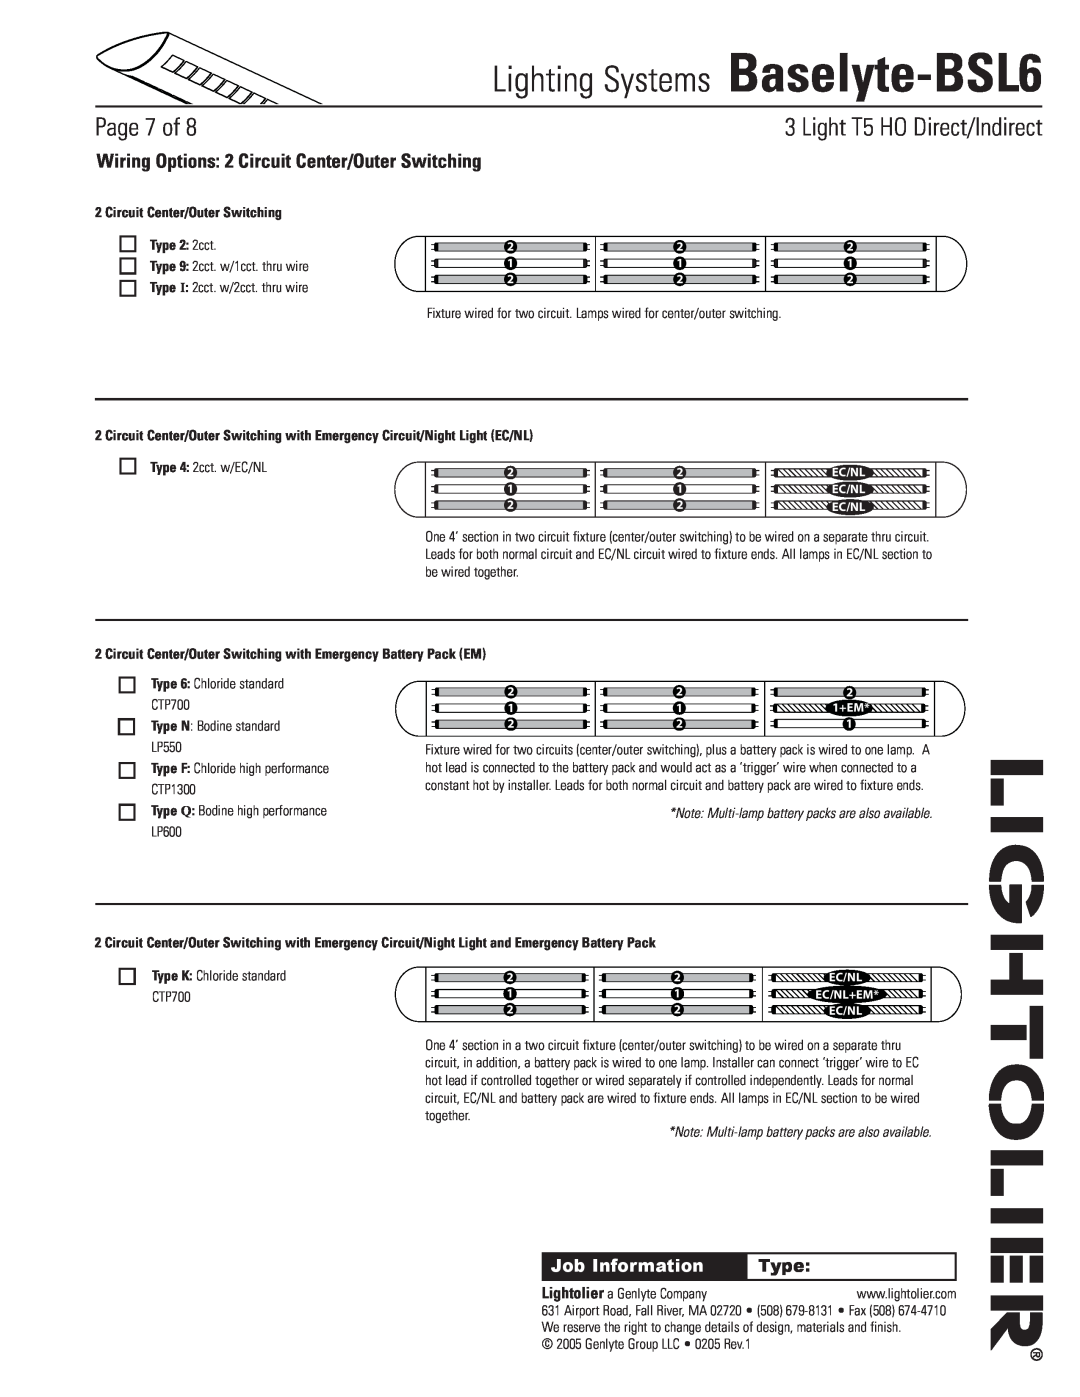 Lightolier Baselyte-BSL6 Wiring Options 2 Circuit Center/Outer Switching, Circuit Center/Outer Switching Type 2 2cct 